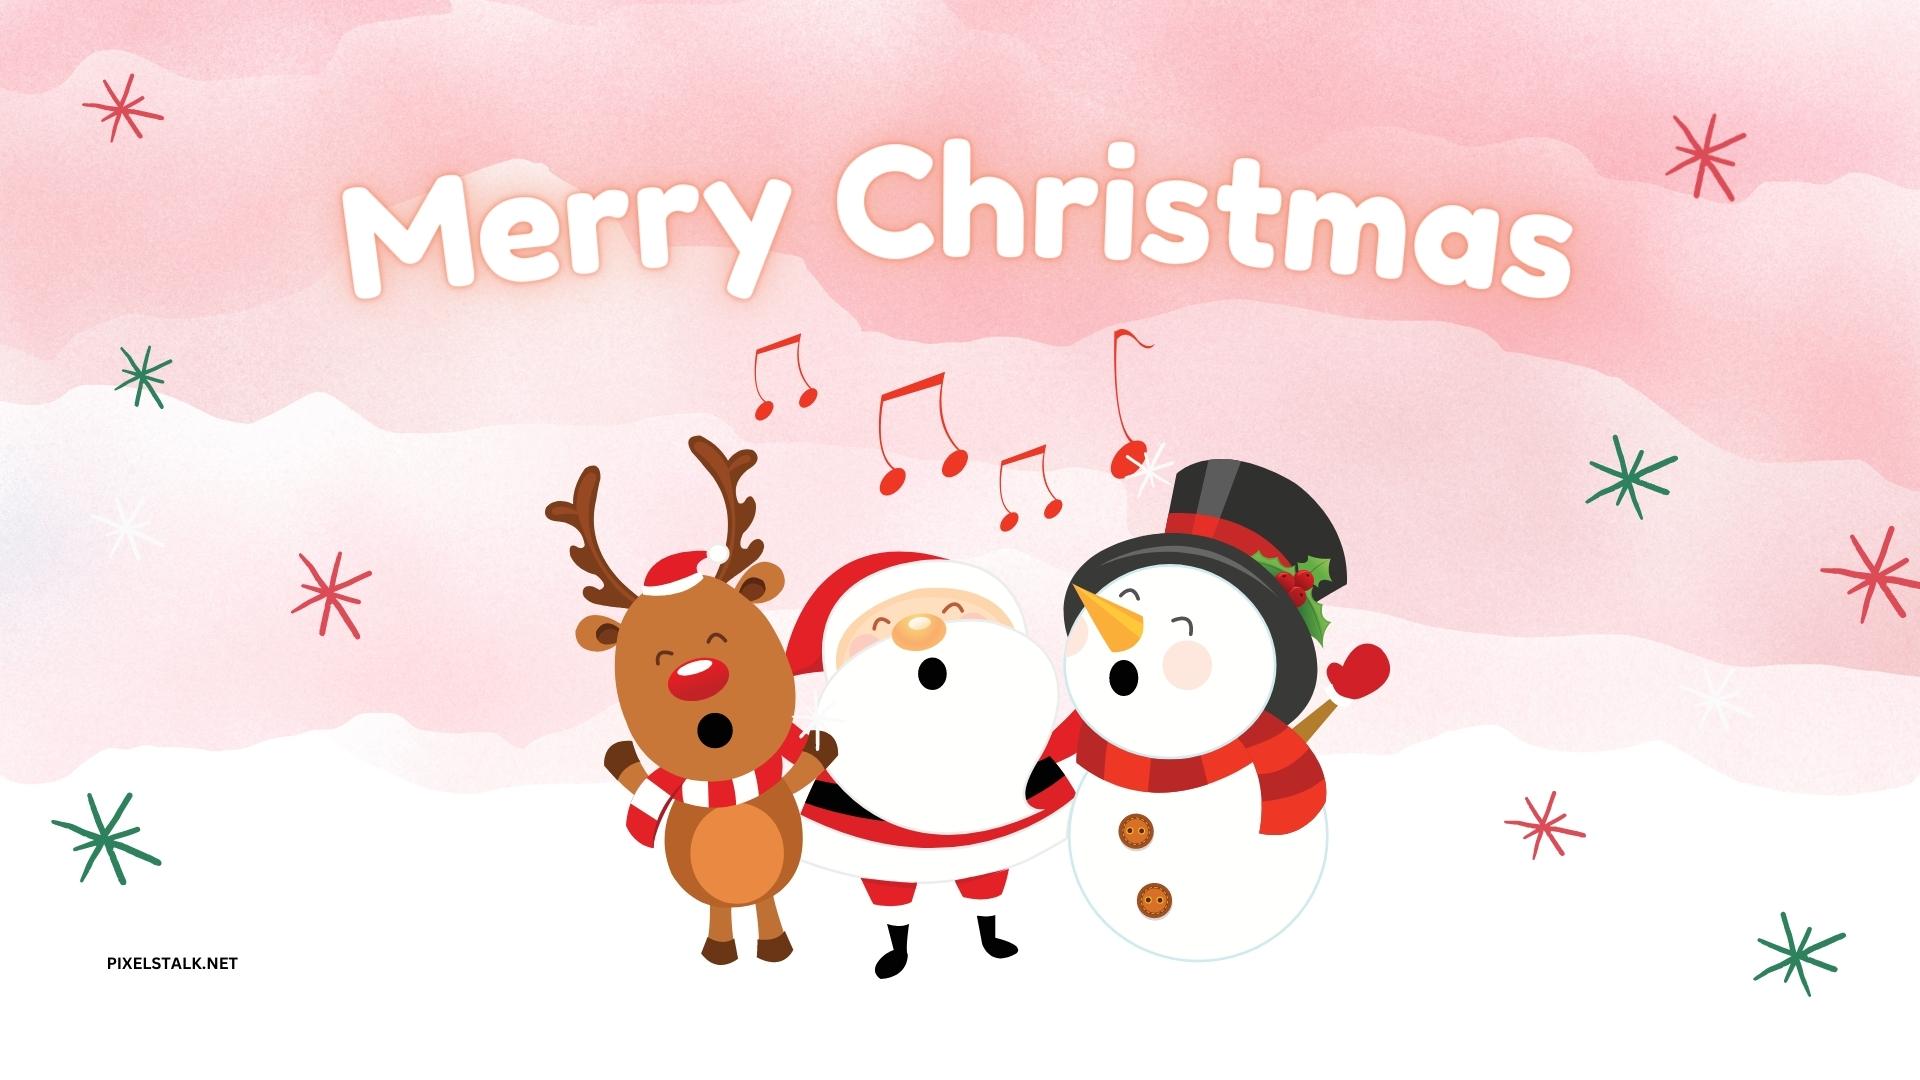 Merry Christmas 2022 Wallpapers HD 